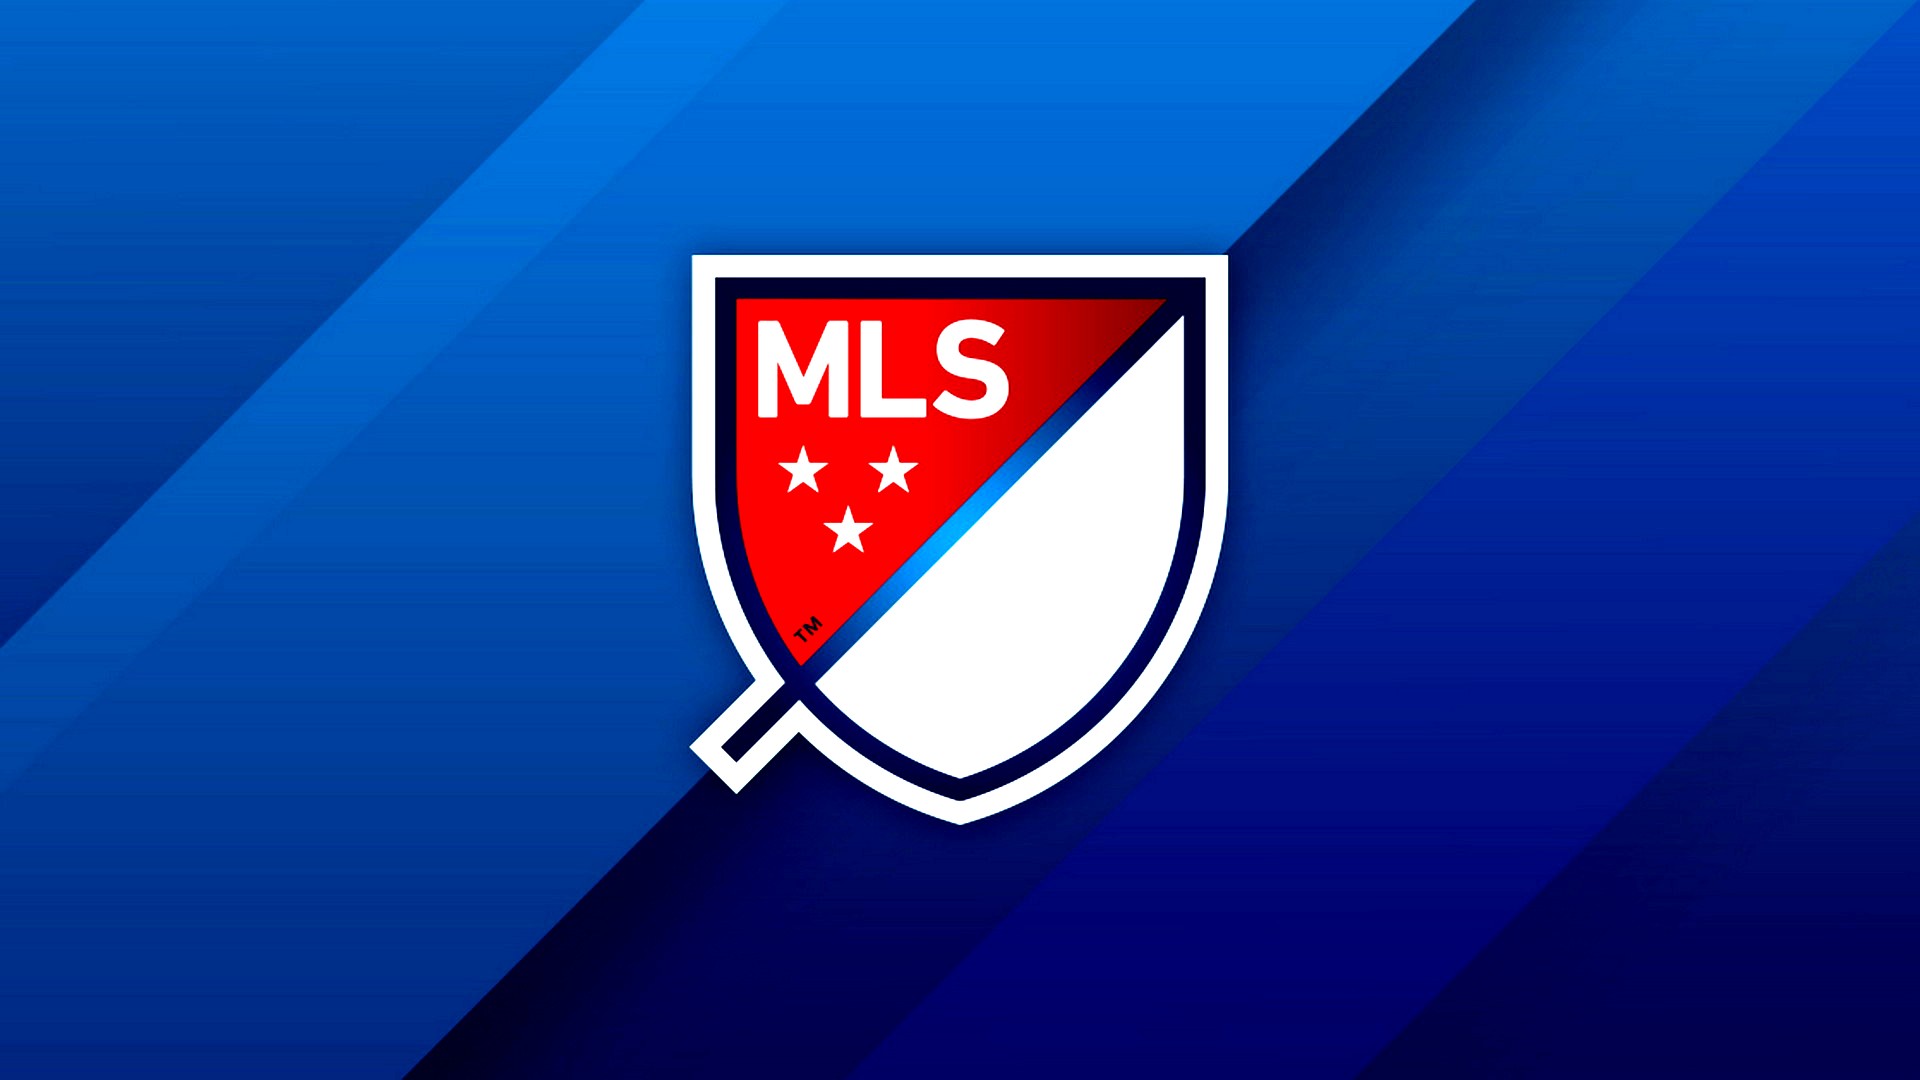 MLS For Desktop Wallpaper with high-resolution 1920x1080 pixel. You can use this wallpaper for your Desktop Computers, Mac Screensavers, Windows Backgrounds, iPhone Wallpapers, Tablet or Android Lock screen and another Mobile device